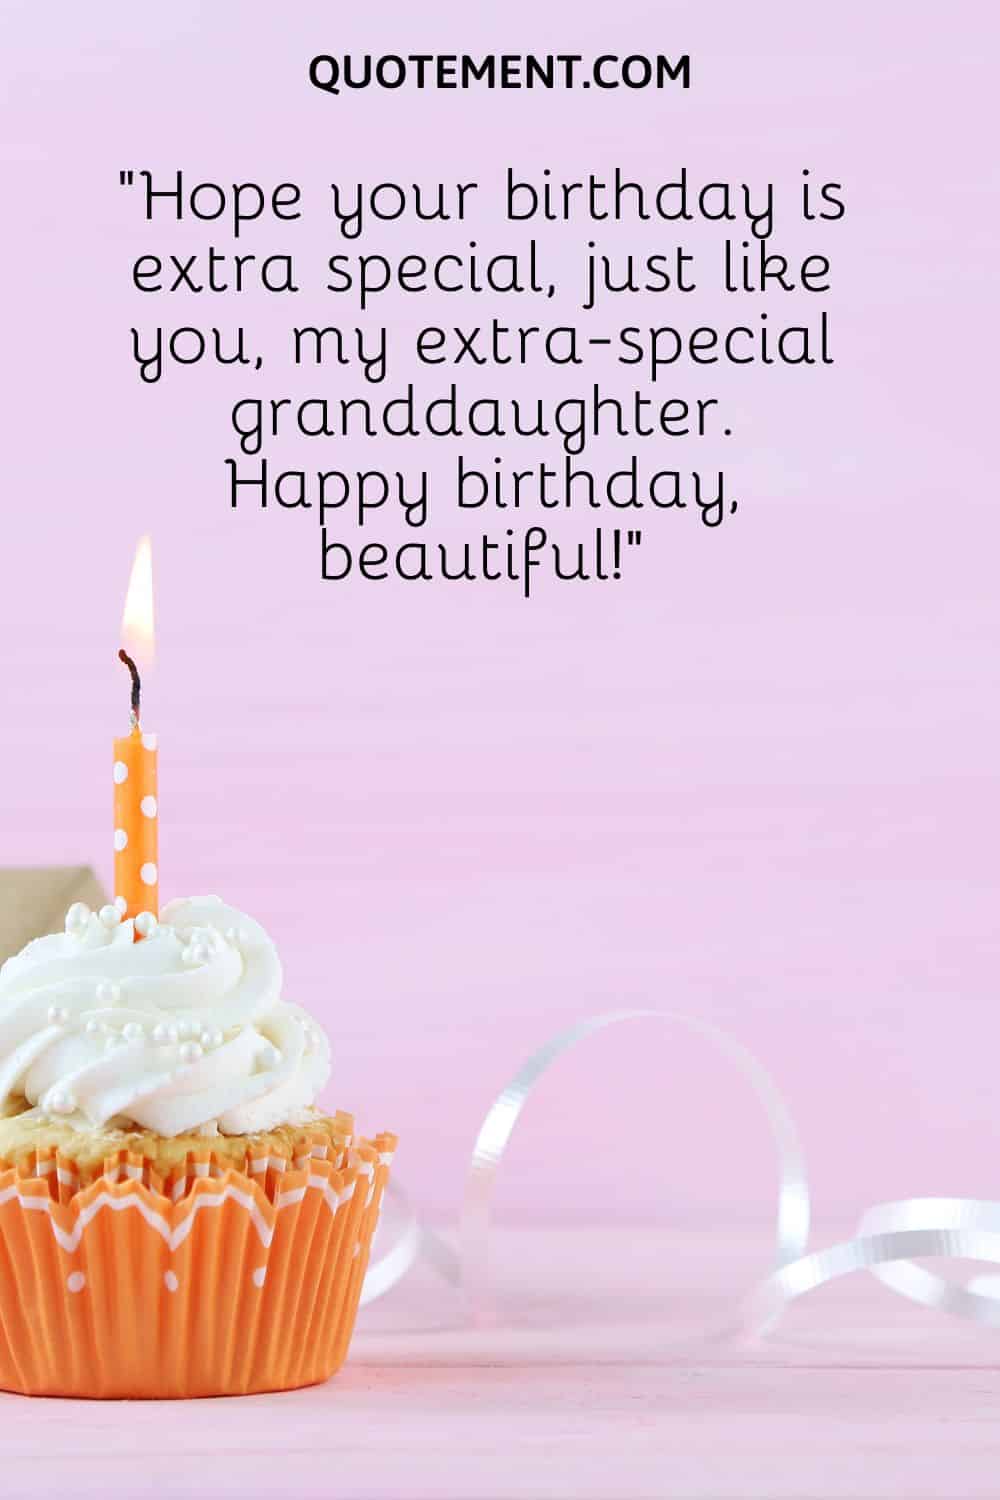 Hope your birthday is extra special, just like you, my extra-special granddaughter